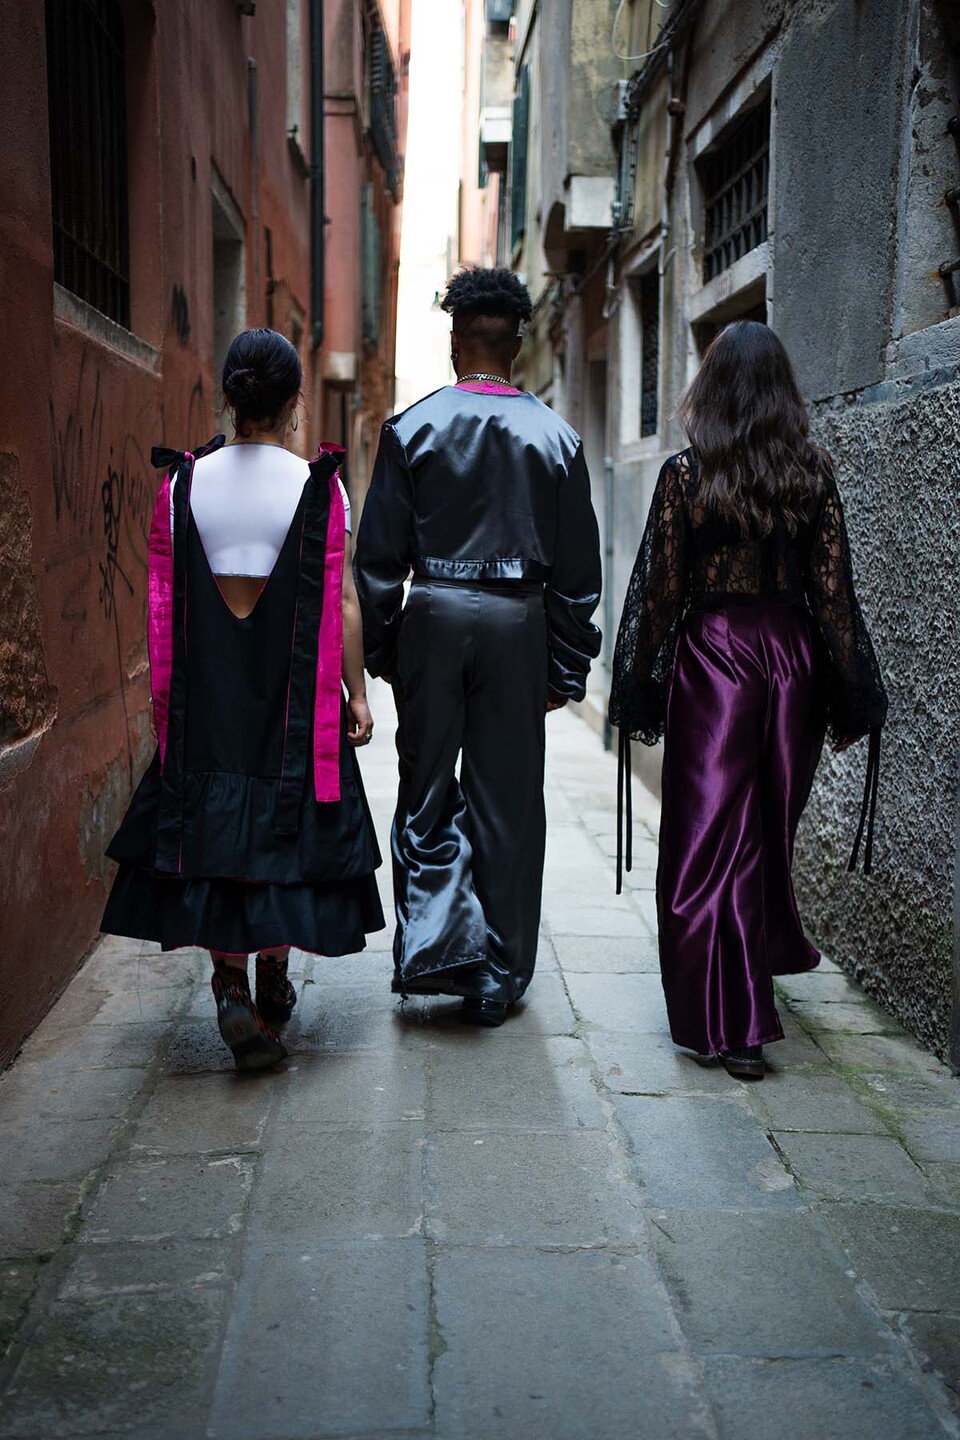 Rear view of a man and two women modelling Flamenco inspired streetwear from a collection by Paula Pacheco ina narrow street in Seville